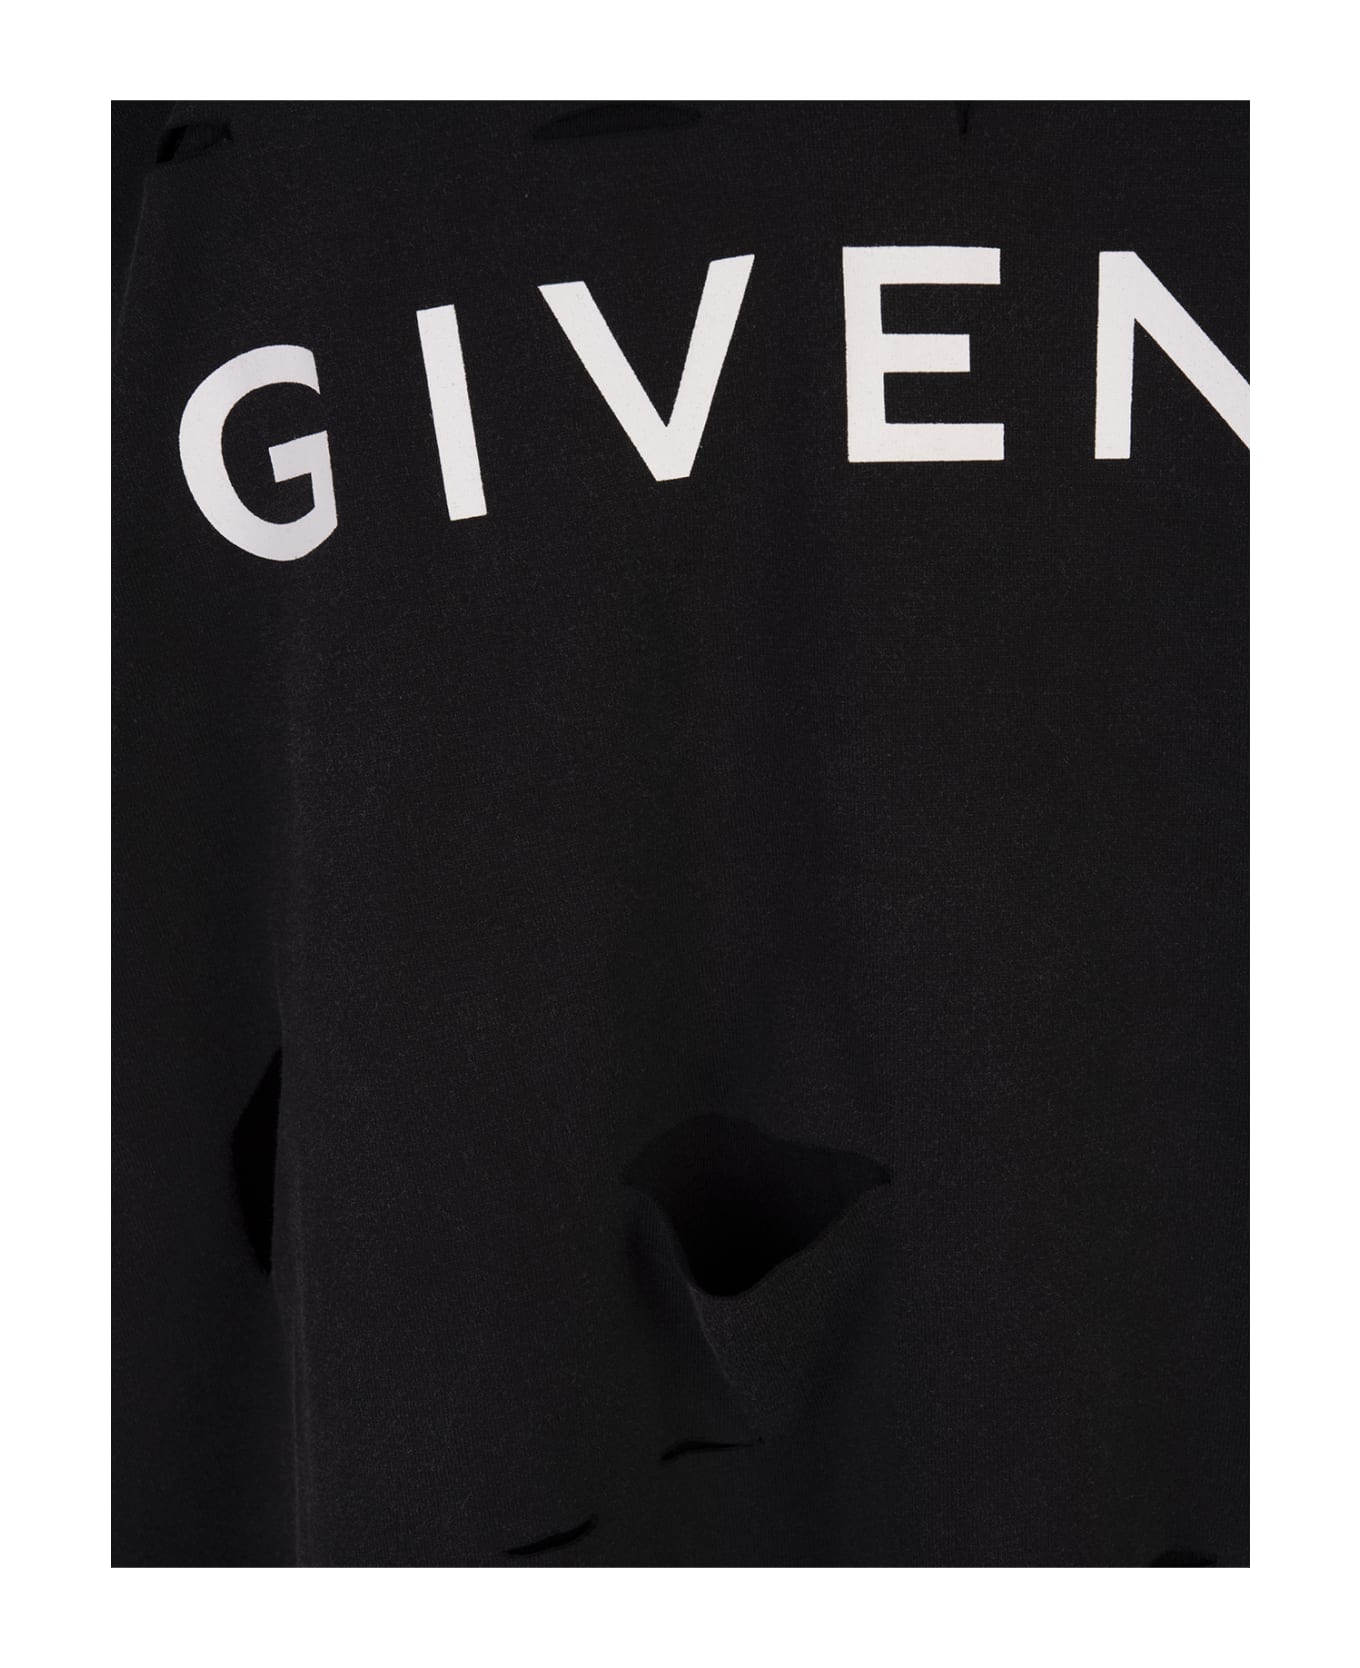 Givenchy Black Destroyed T-shirt With Logo - Black